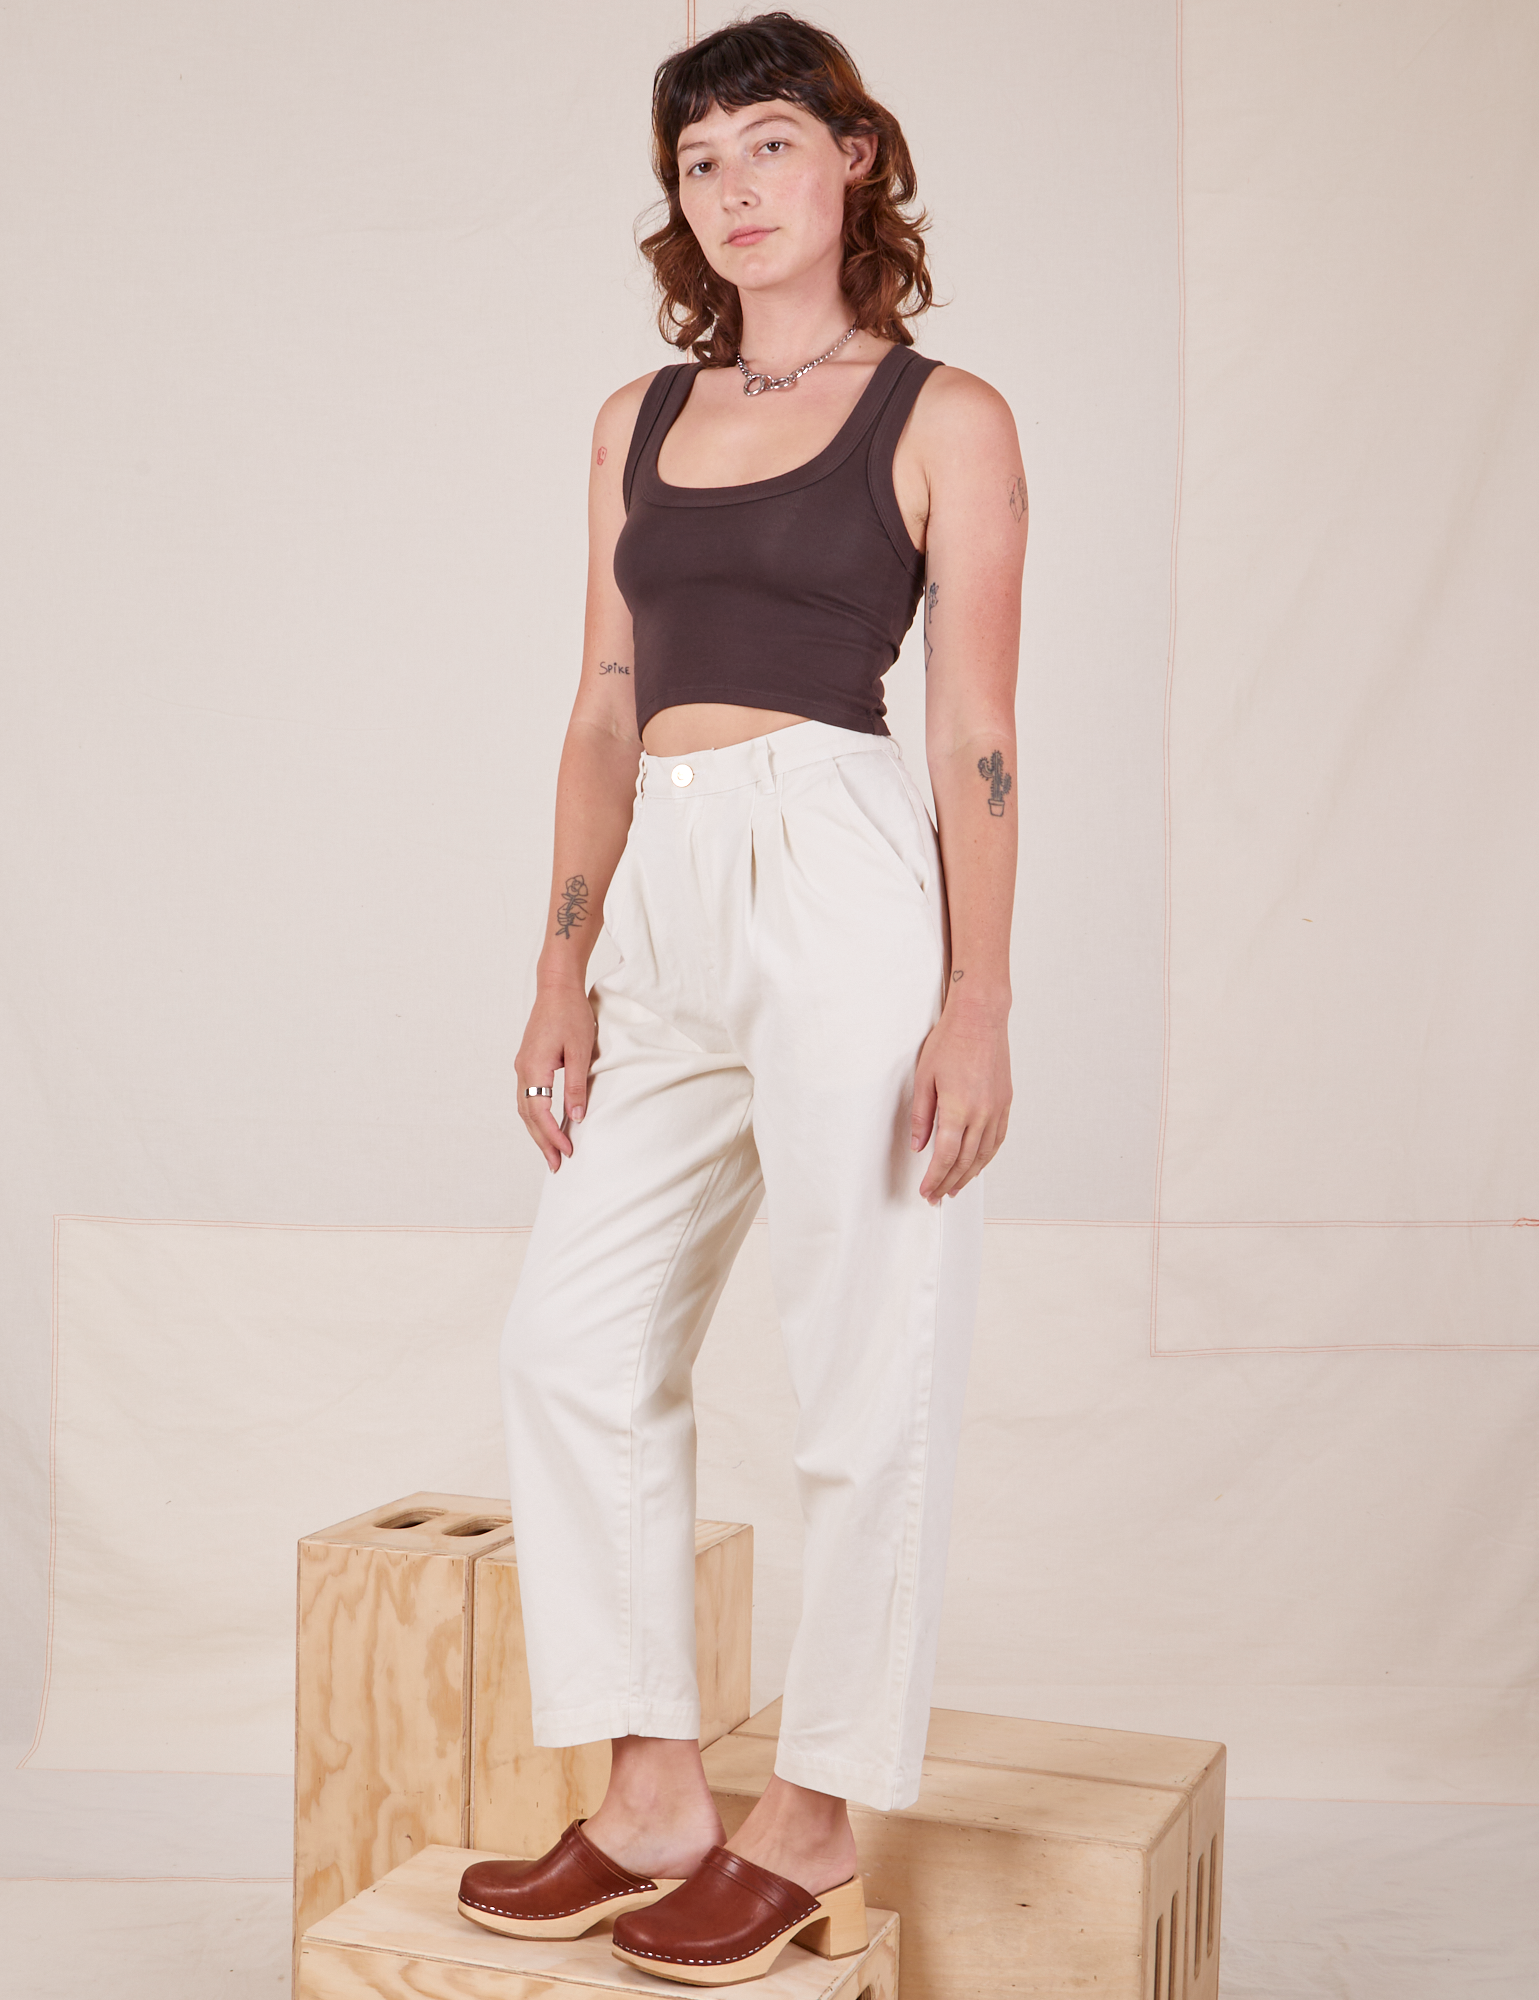 Angled view of Heavyweight Trousers in Vintage Tee Off-White and espresso brown Cropped Tank Top worn by Alex.